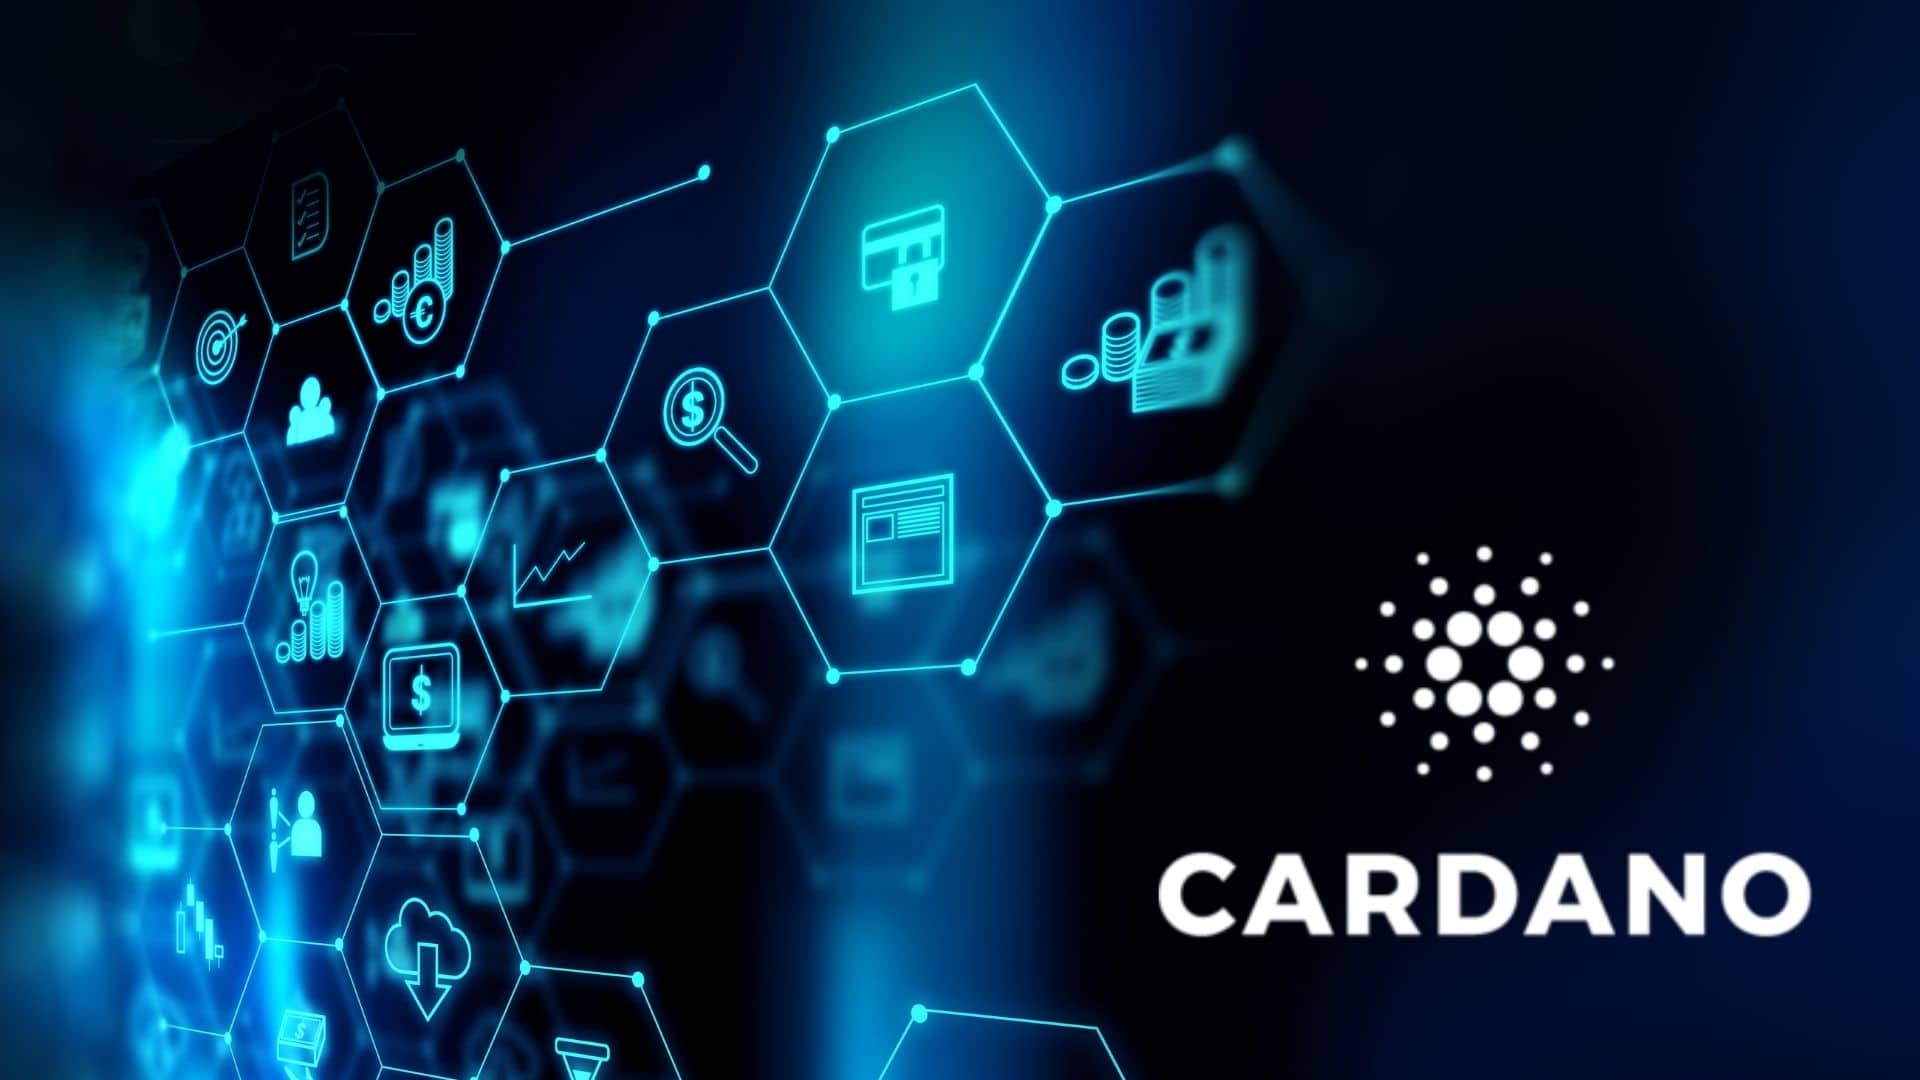 Cardano to host storefront for developers to upload their DApps